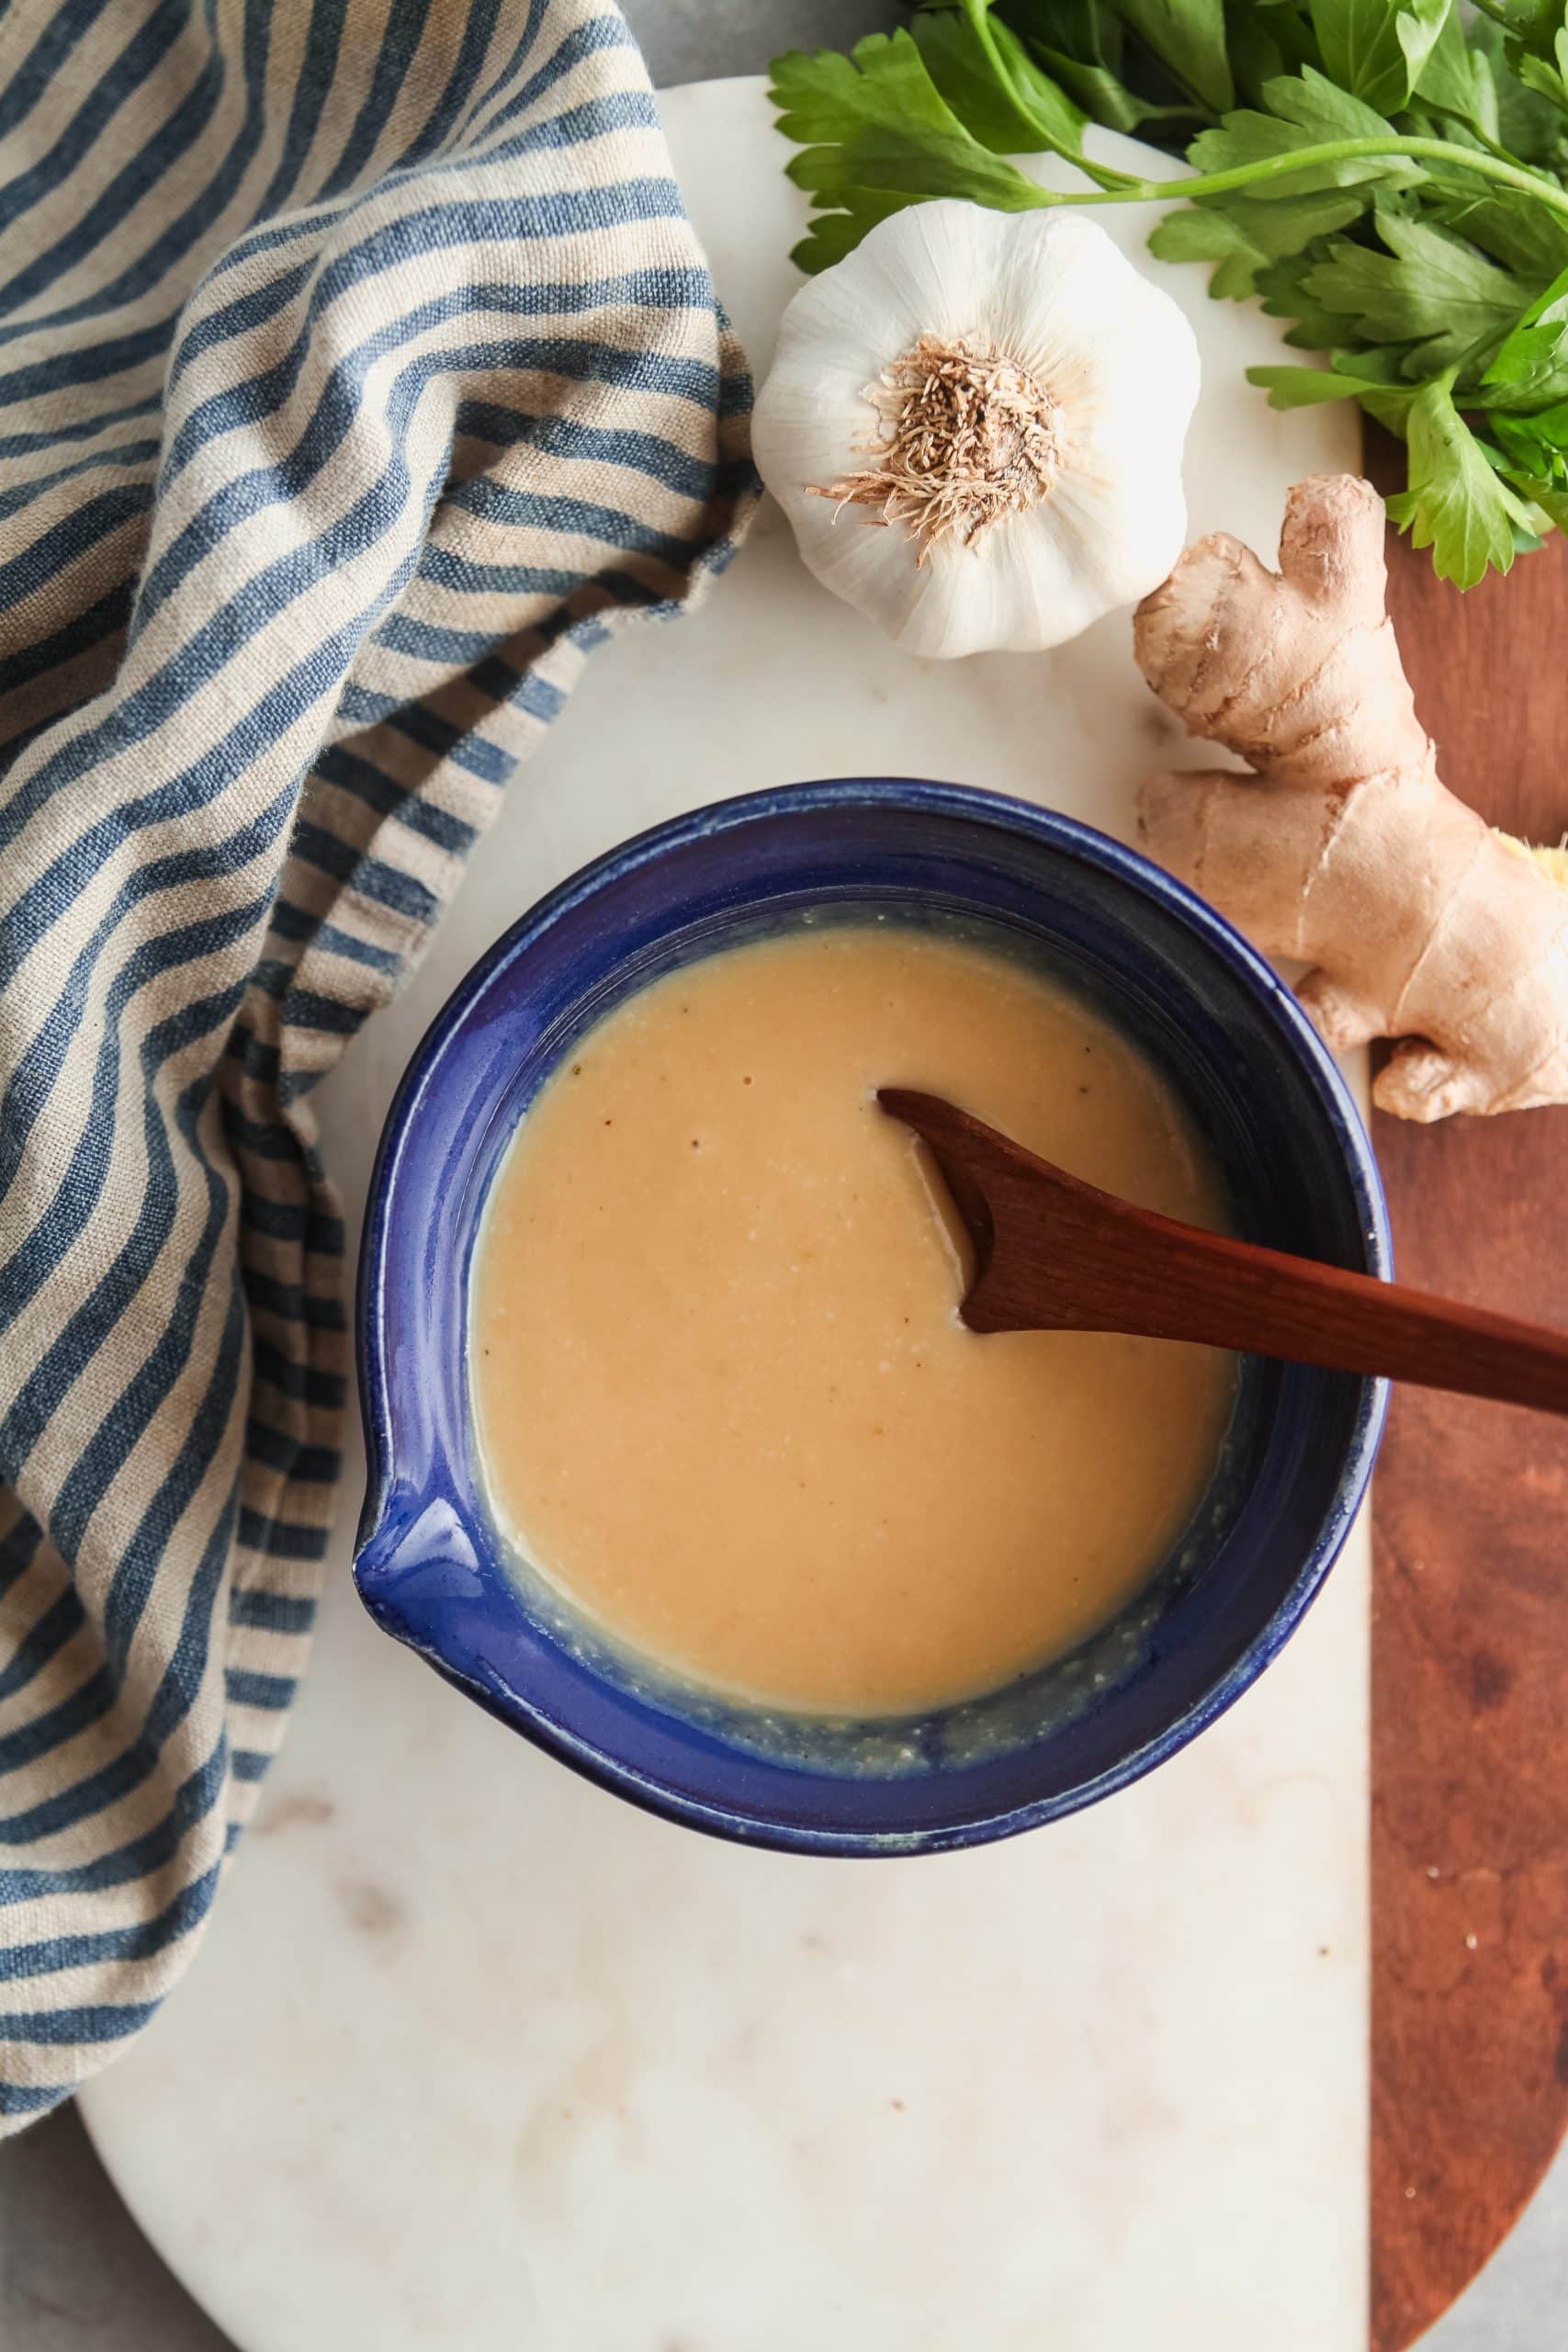 Homemade miso sauce for veggies or meat. 